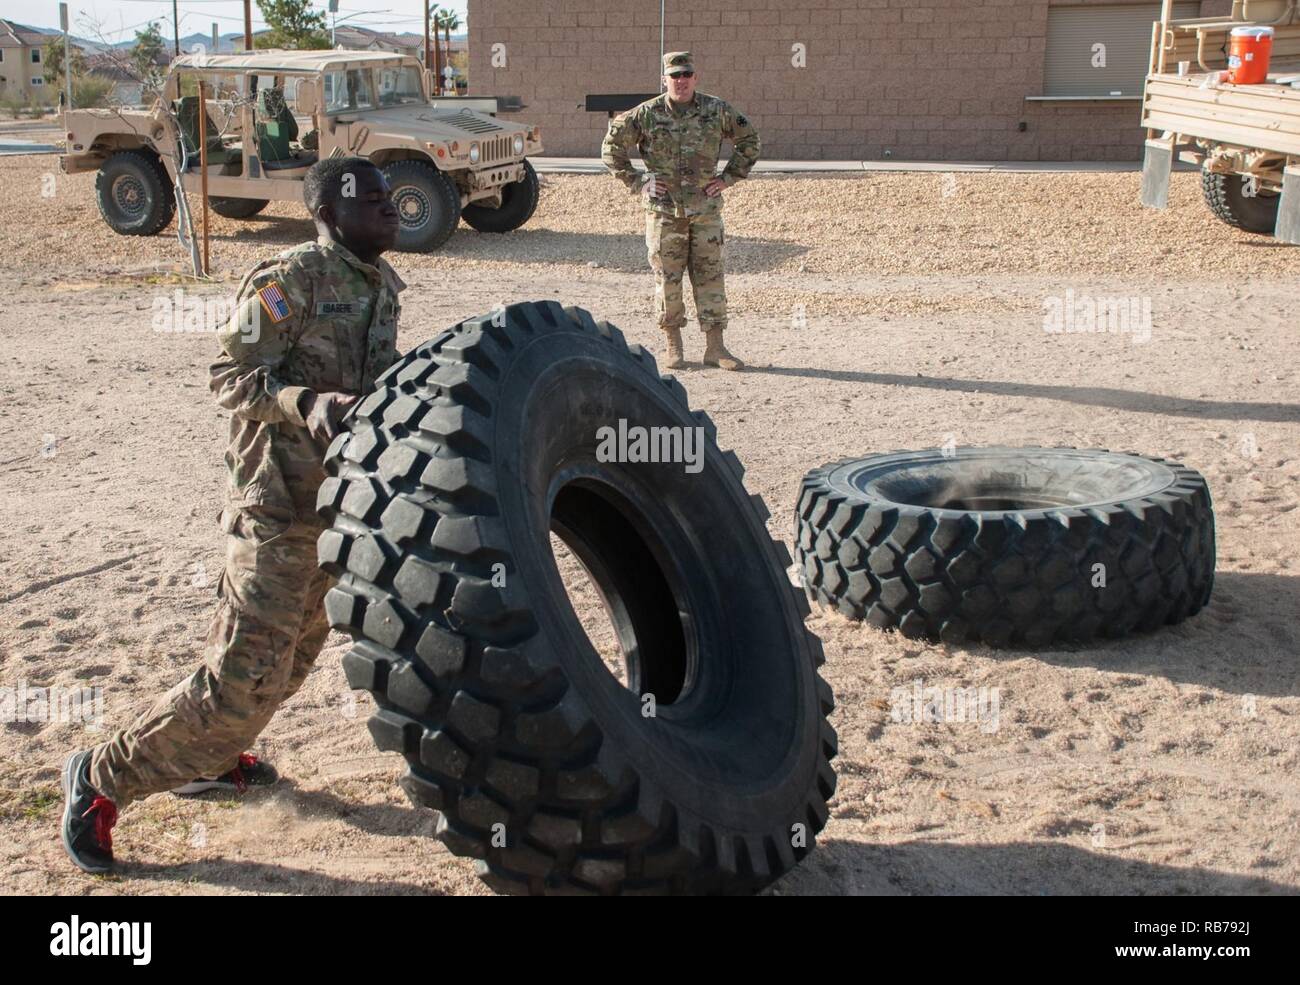 FORT IRWIN, Calif. — U.S. Army Staff Sgt. Schandorf Asabere, E Troop, 2nd Squadron, 11th Armored Cavalry Regiment, flips a tire during the physical fitness portion of the NCO of the Quarter competition.  Schandorf earned the honor of being named Fort Irwin‘s NCO of the Quarter, 1st quarter, 2017.  The NCO of the Quarter board is a daylong event designed to evaluate the NCO’s, both physically and mentally. Stock Photo